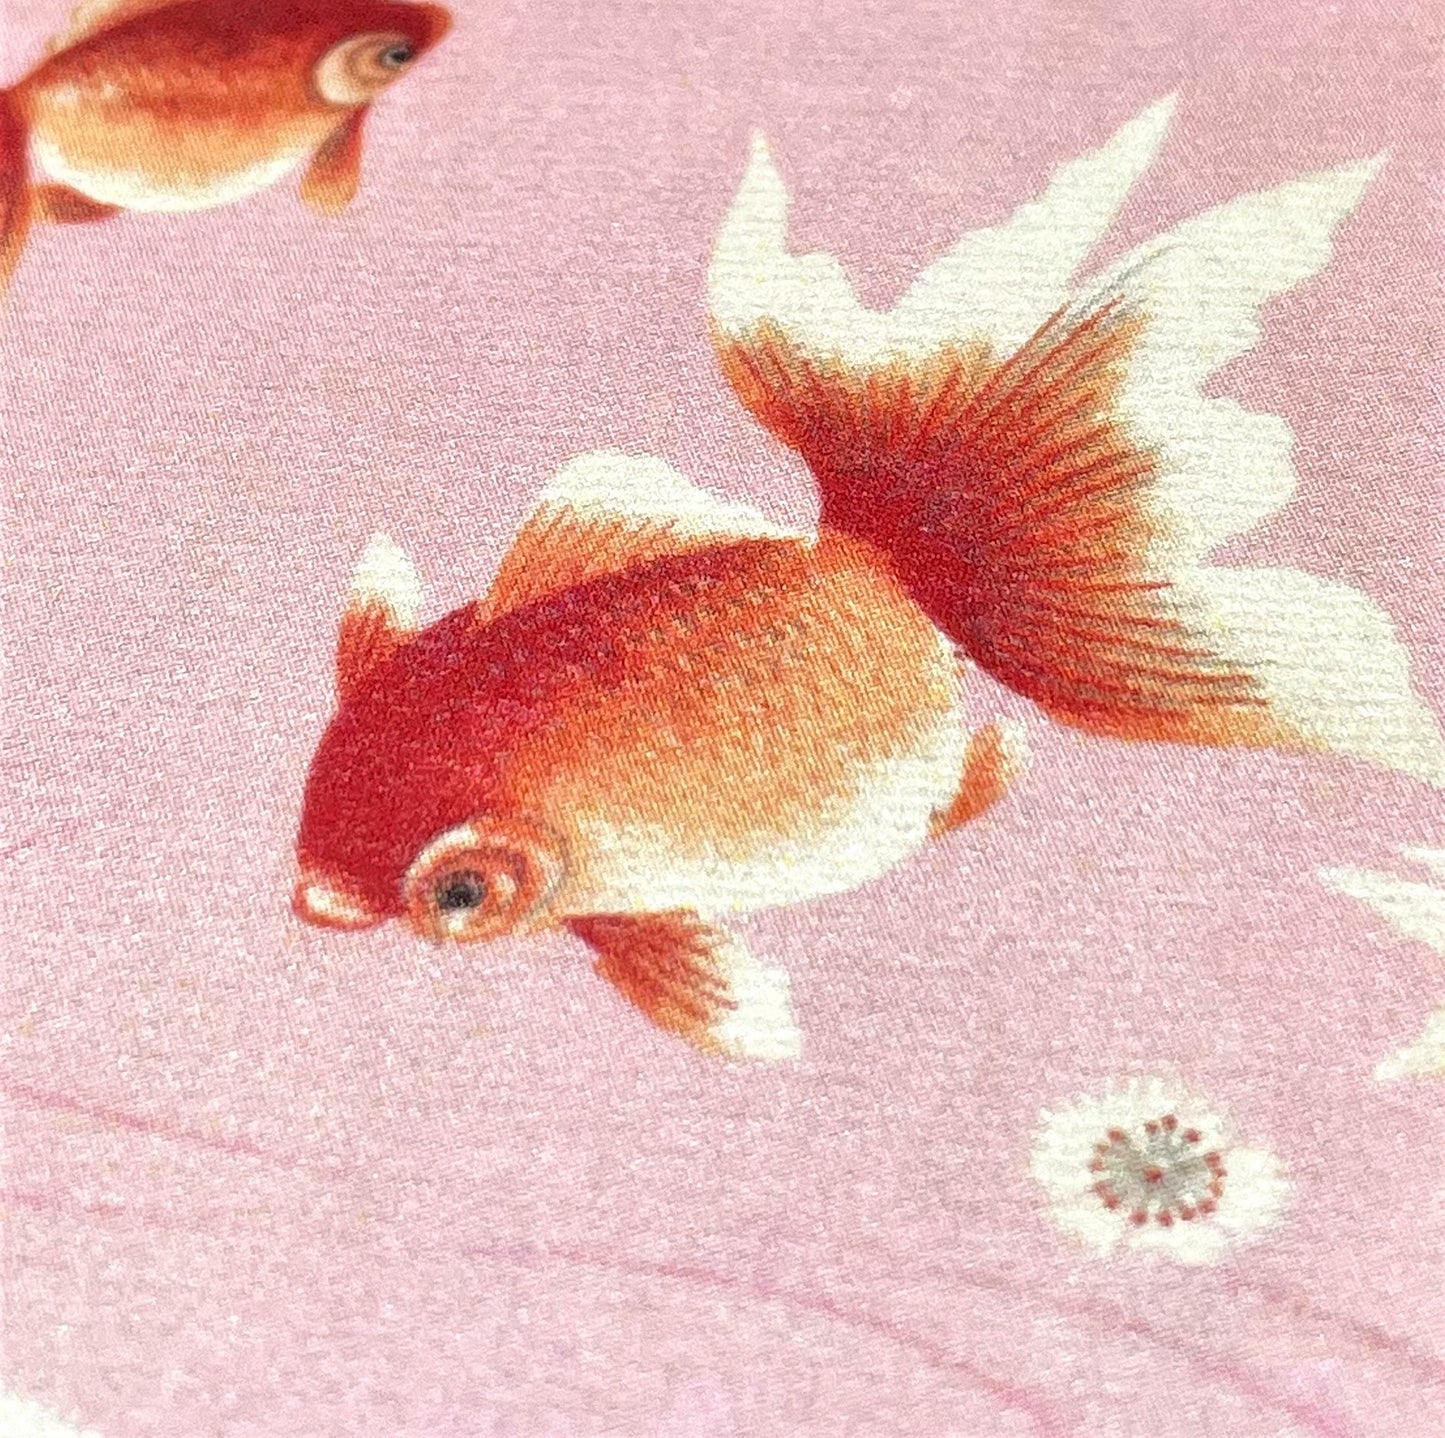 greetings card with repeat pattern of orange goldfish and pink backdrop, close up of a goldfish